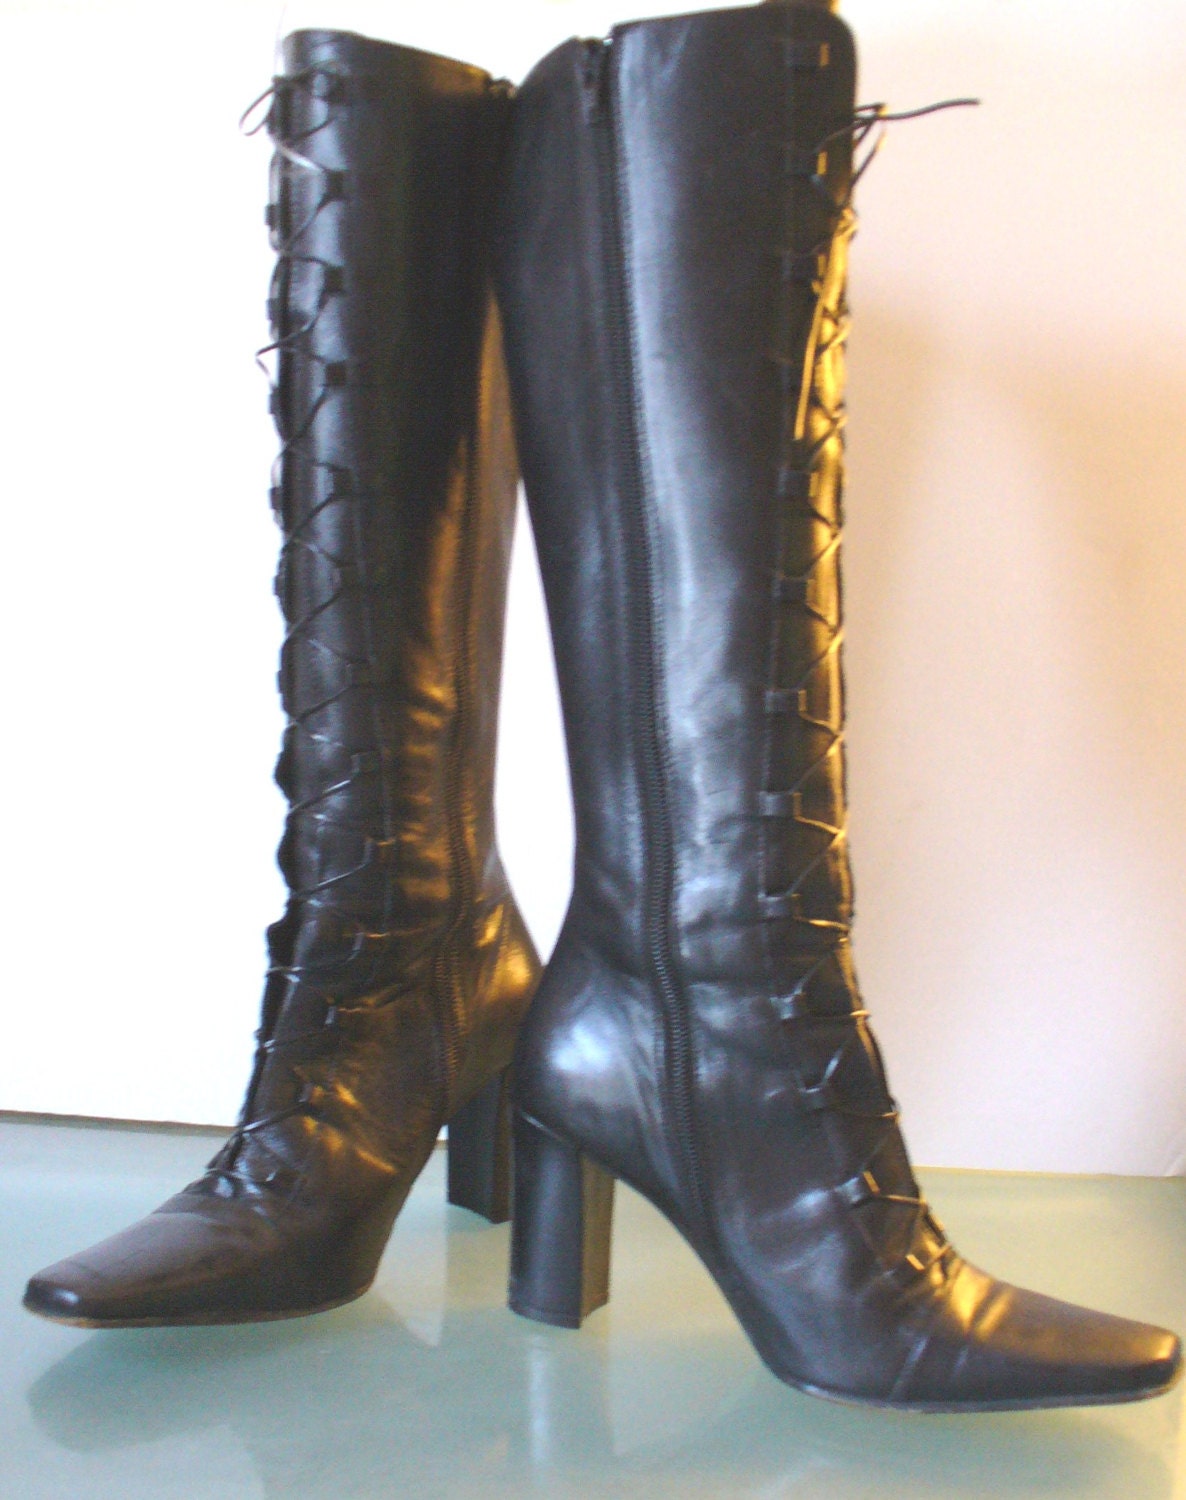 Pegabo Black Leather Corset Style Boots Size by TheOldBagOnline